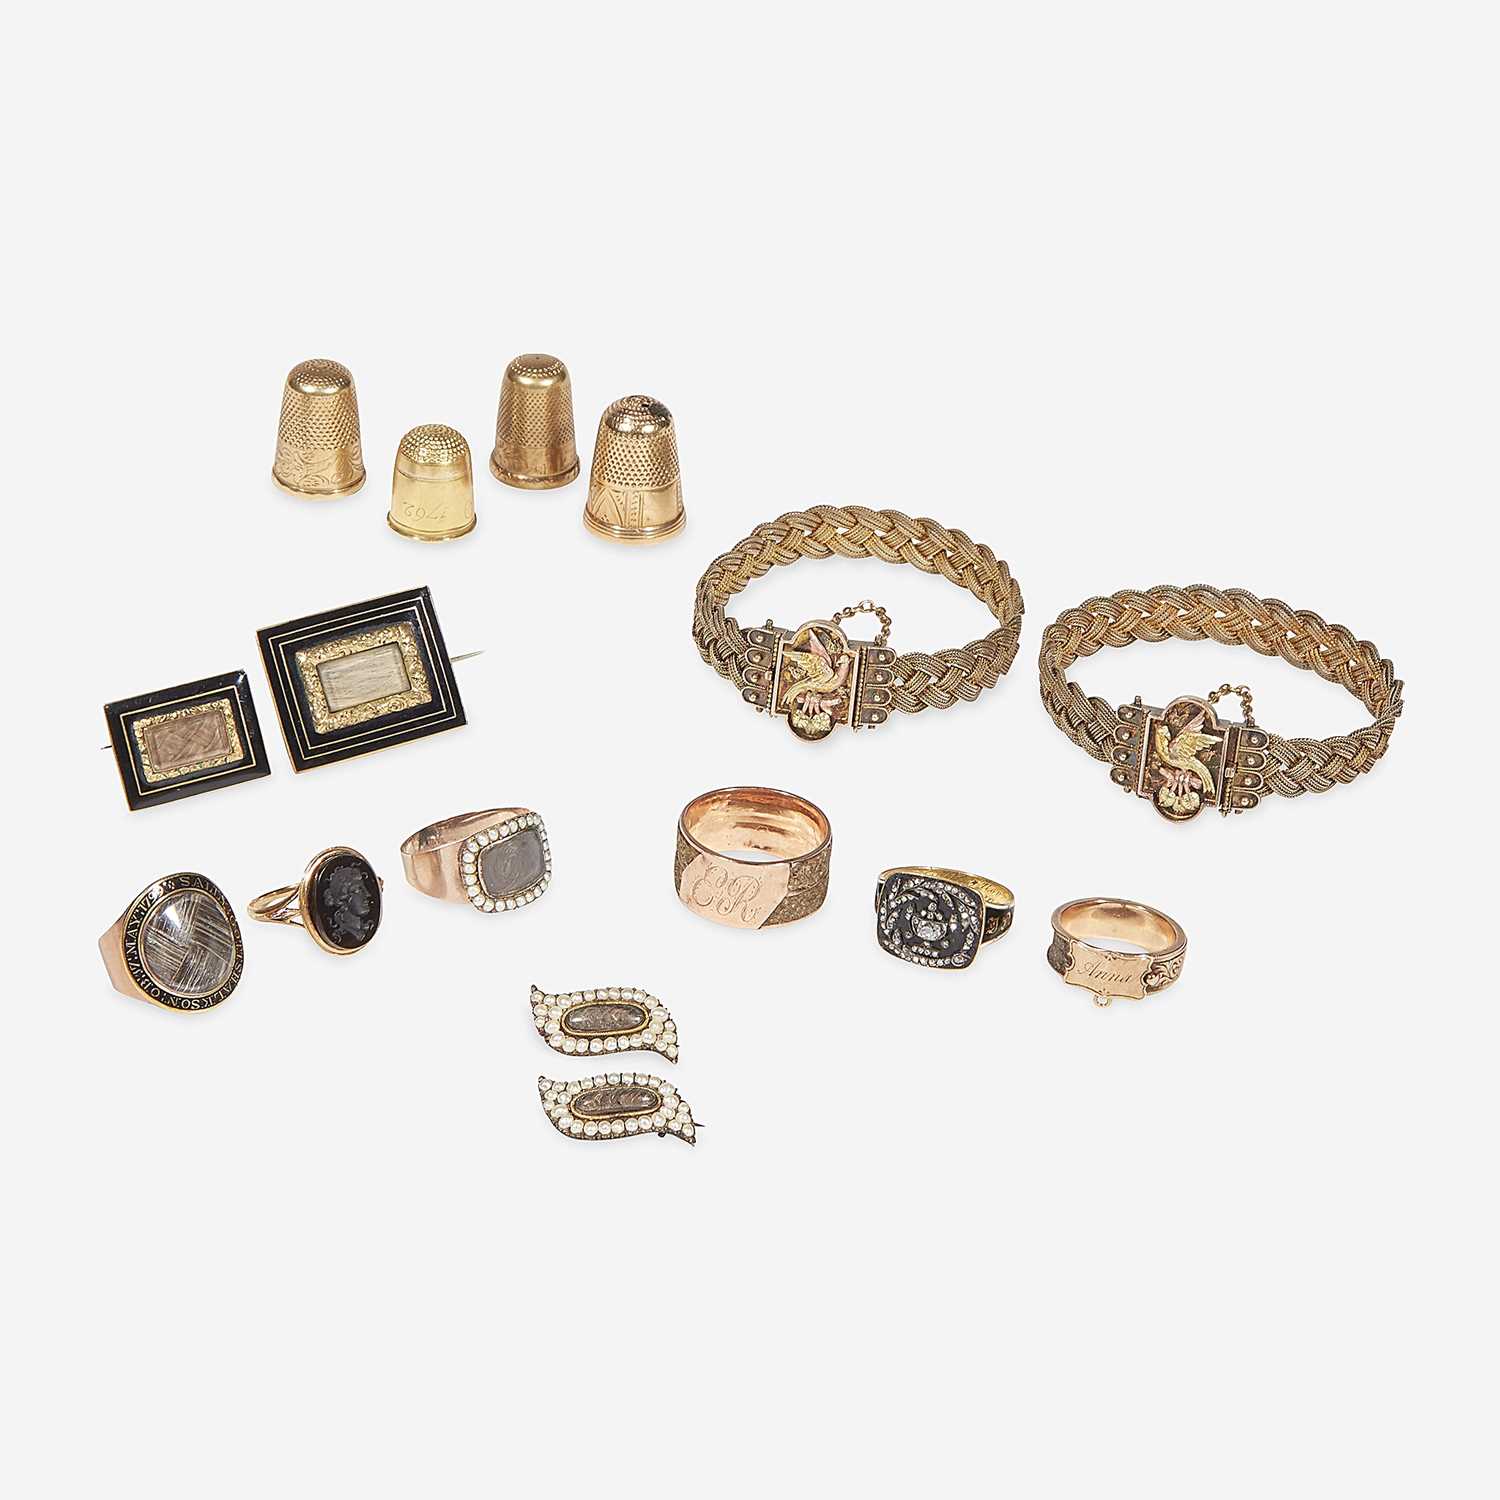 Lot 23 - A group of Mourning and Victorian jewelry and accessories